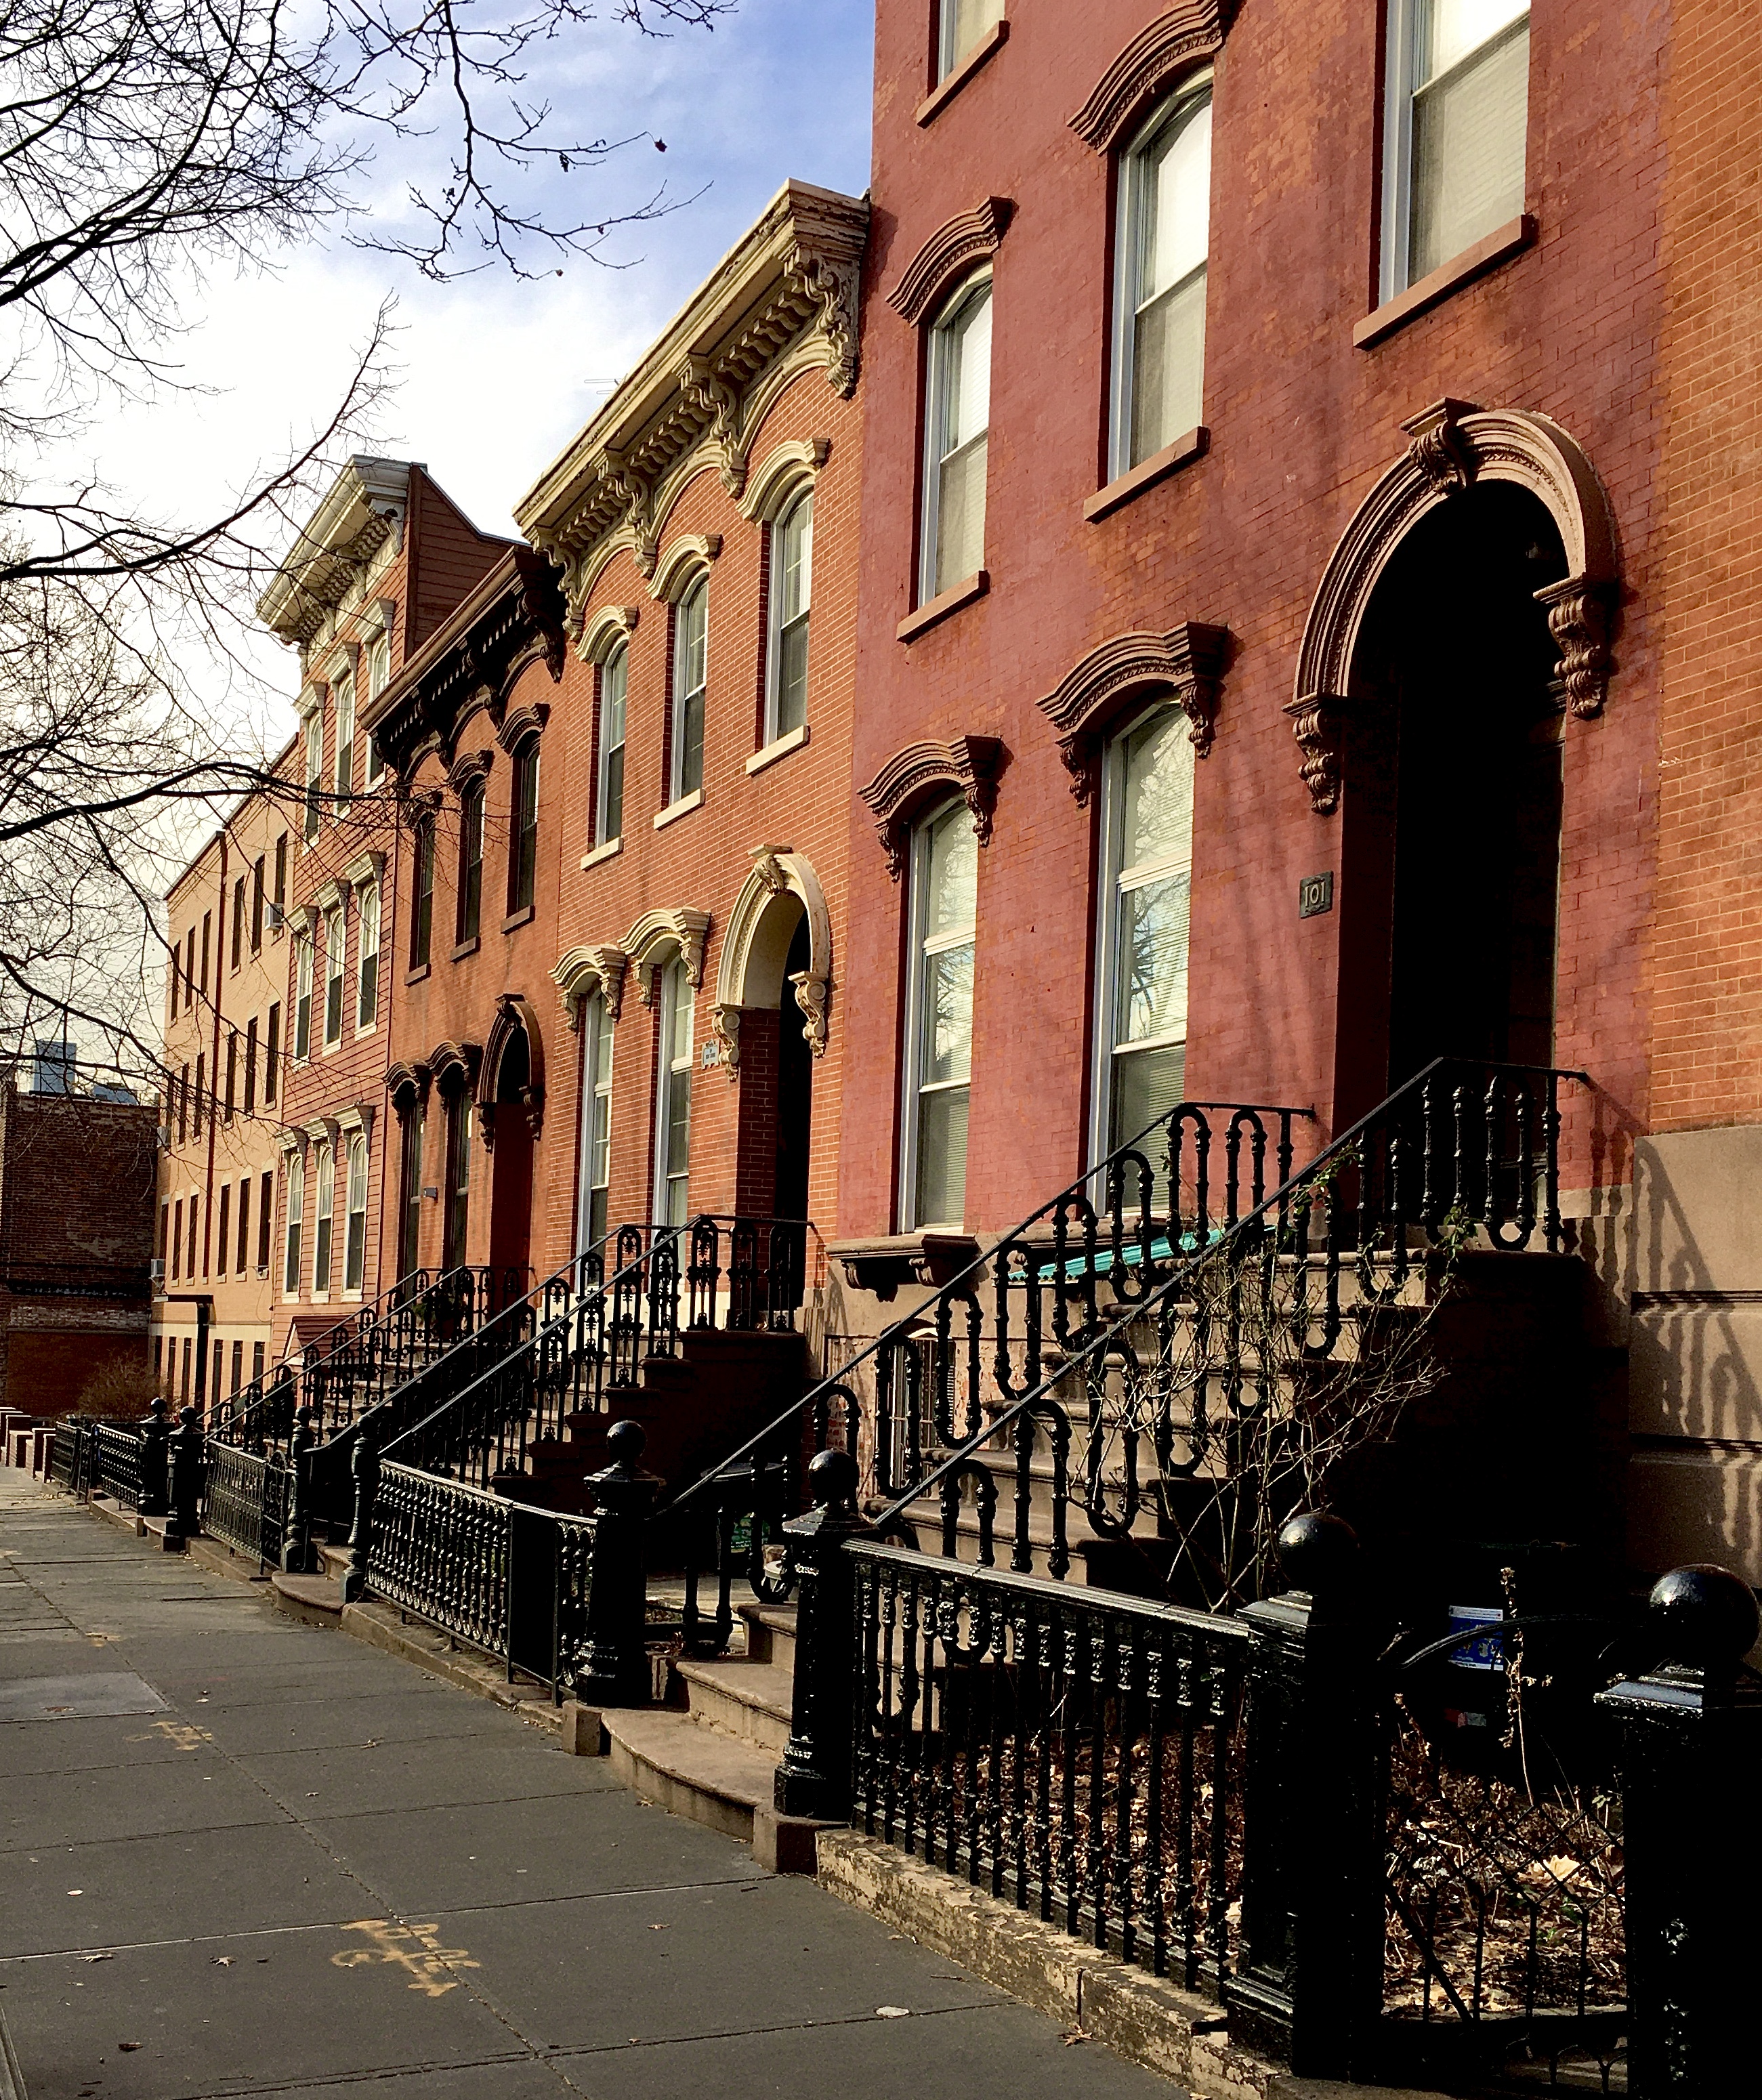 A shipwright named John A. Connolly built 99 and 101 Kent St., which are the two rowhouses at right. Photo: Lore Croghan/Brooklyn Eagle